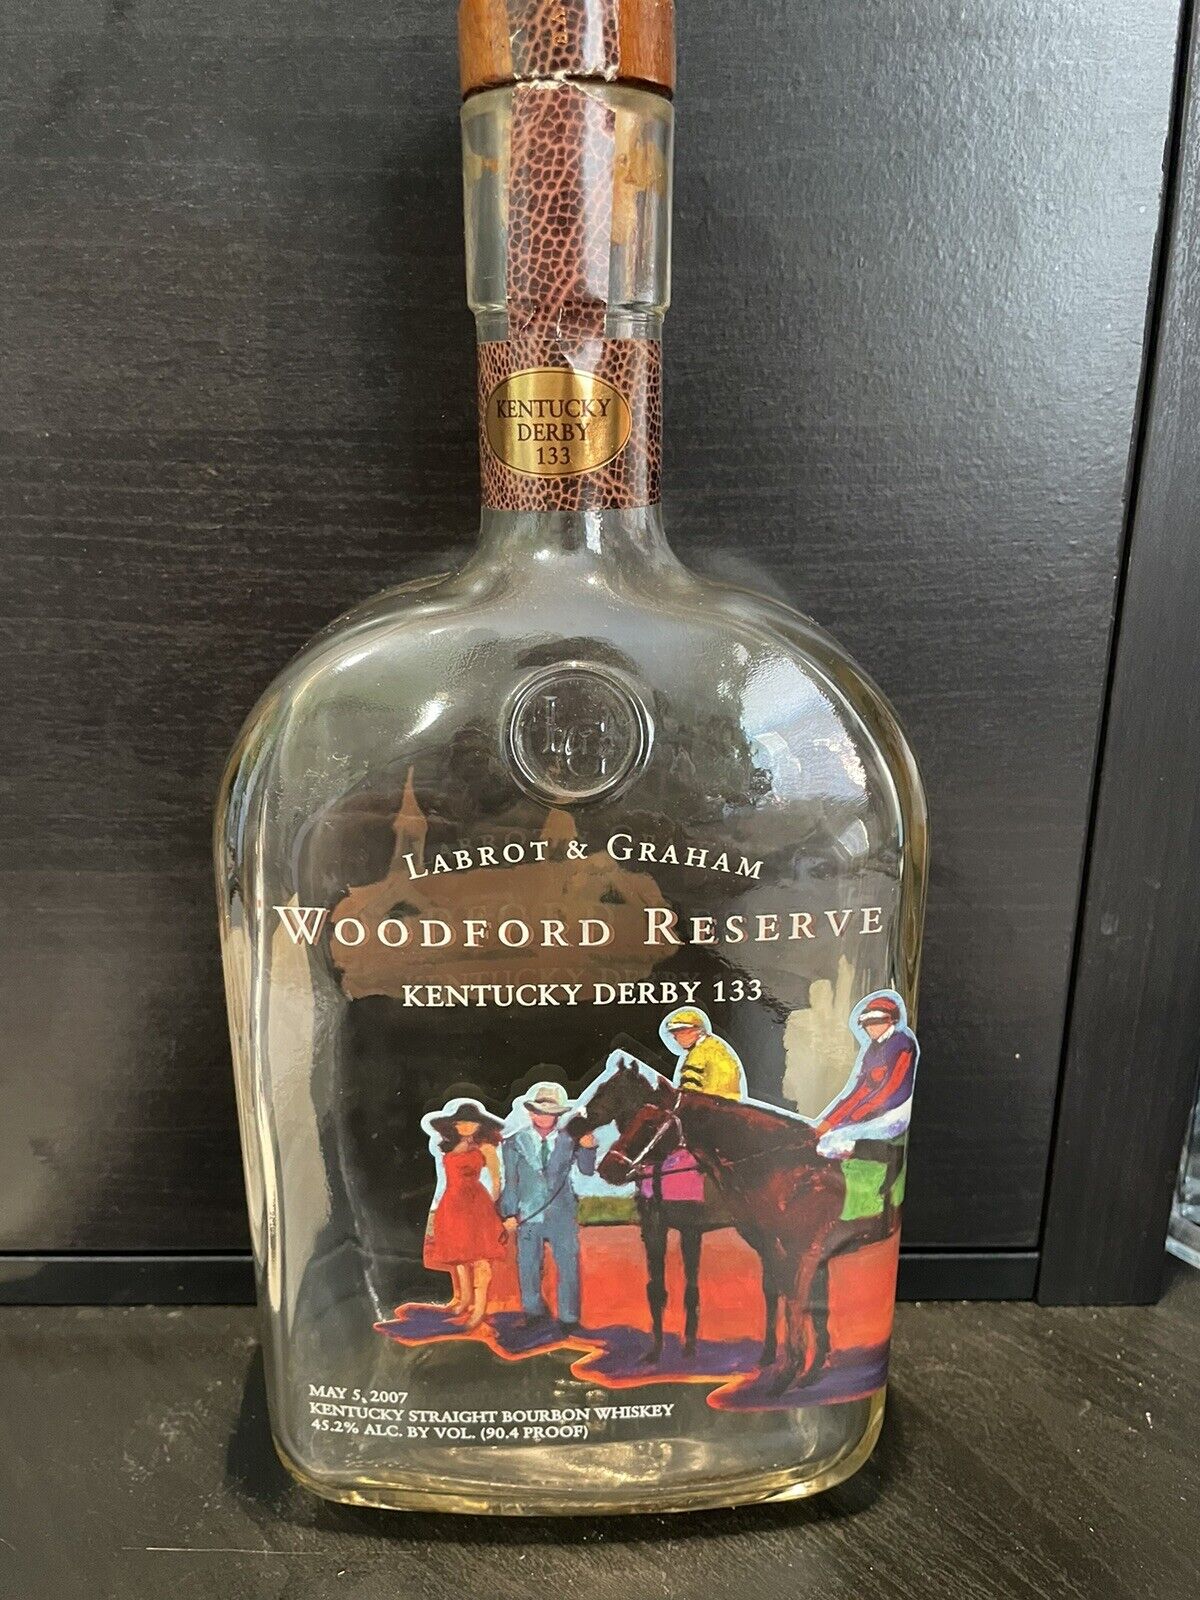 Woodford Reserve Labrot & Graham Kentucky Derby 133 Empty Bottle 2007